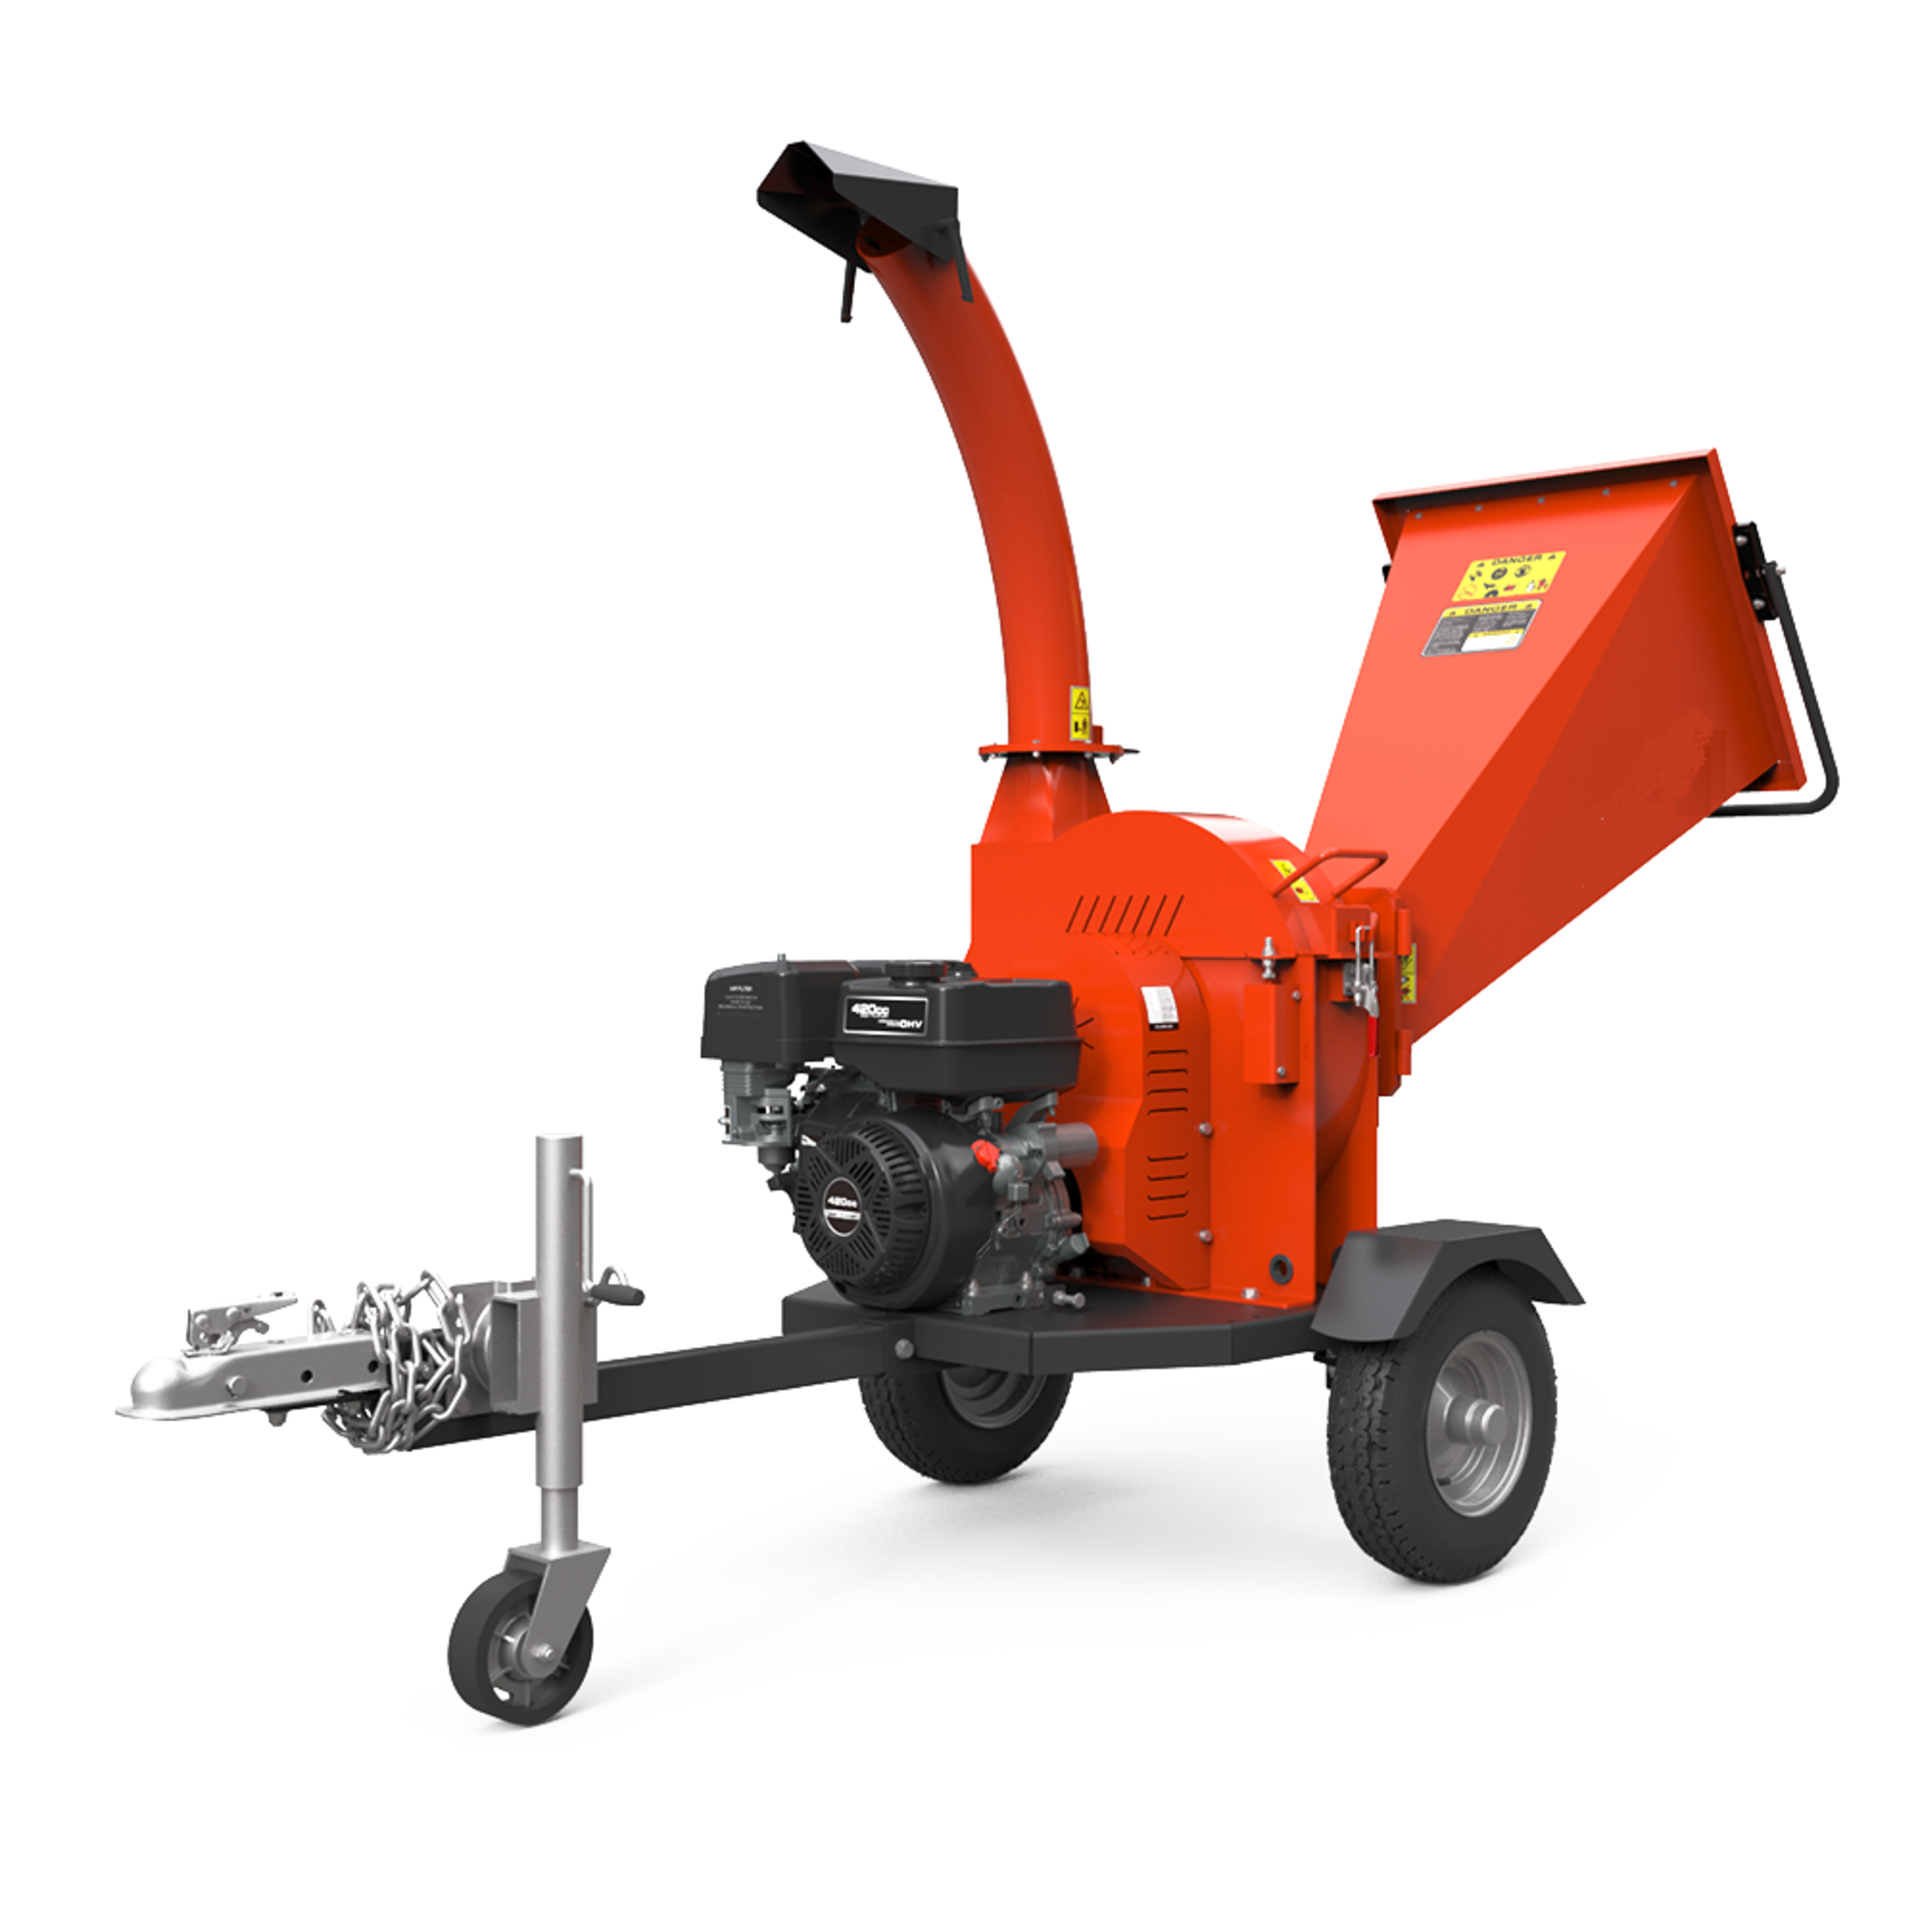 420cc Wood Chipper - BRAND NEW, comes with LED Rear light pack and numberplate holder *PLUS VAT* - Image 4 of 10